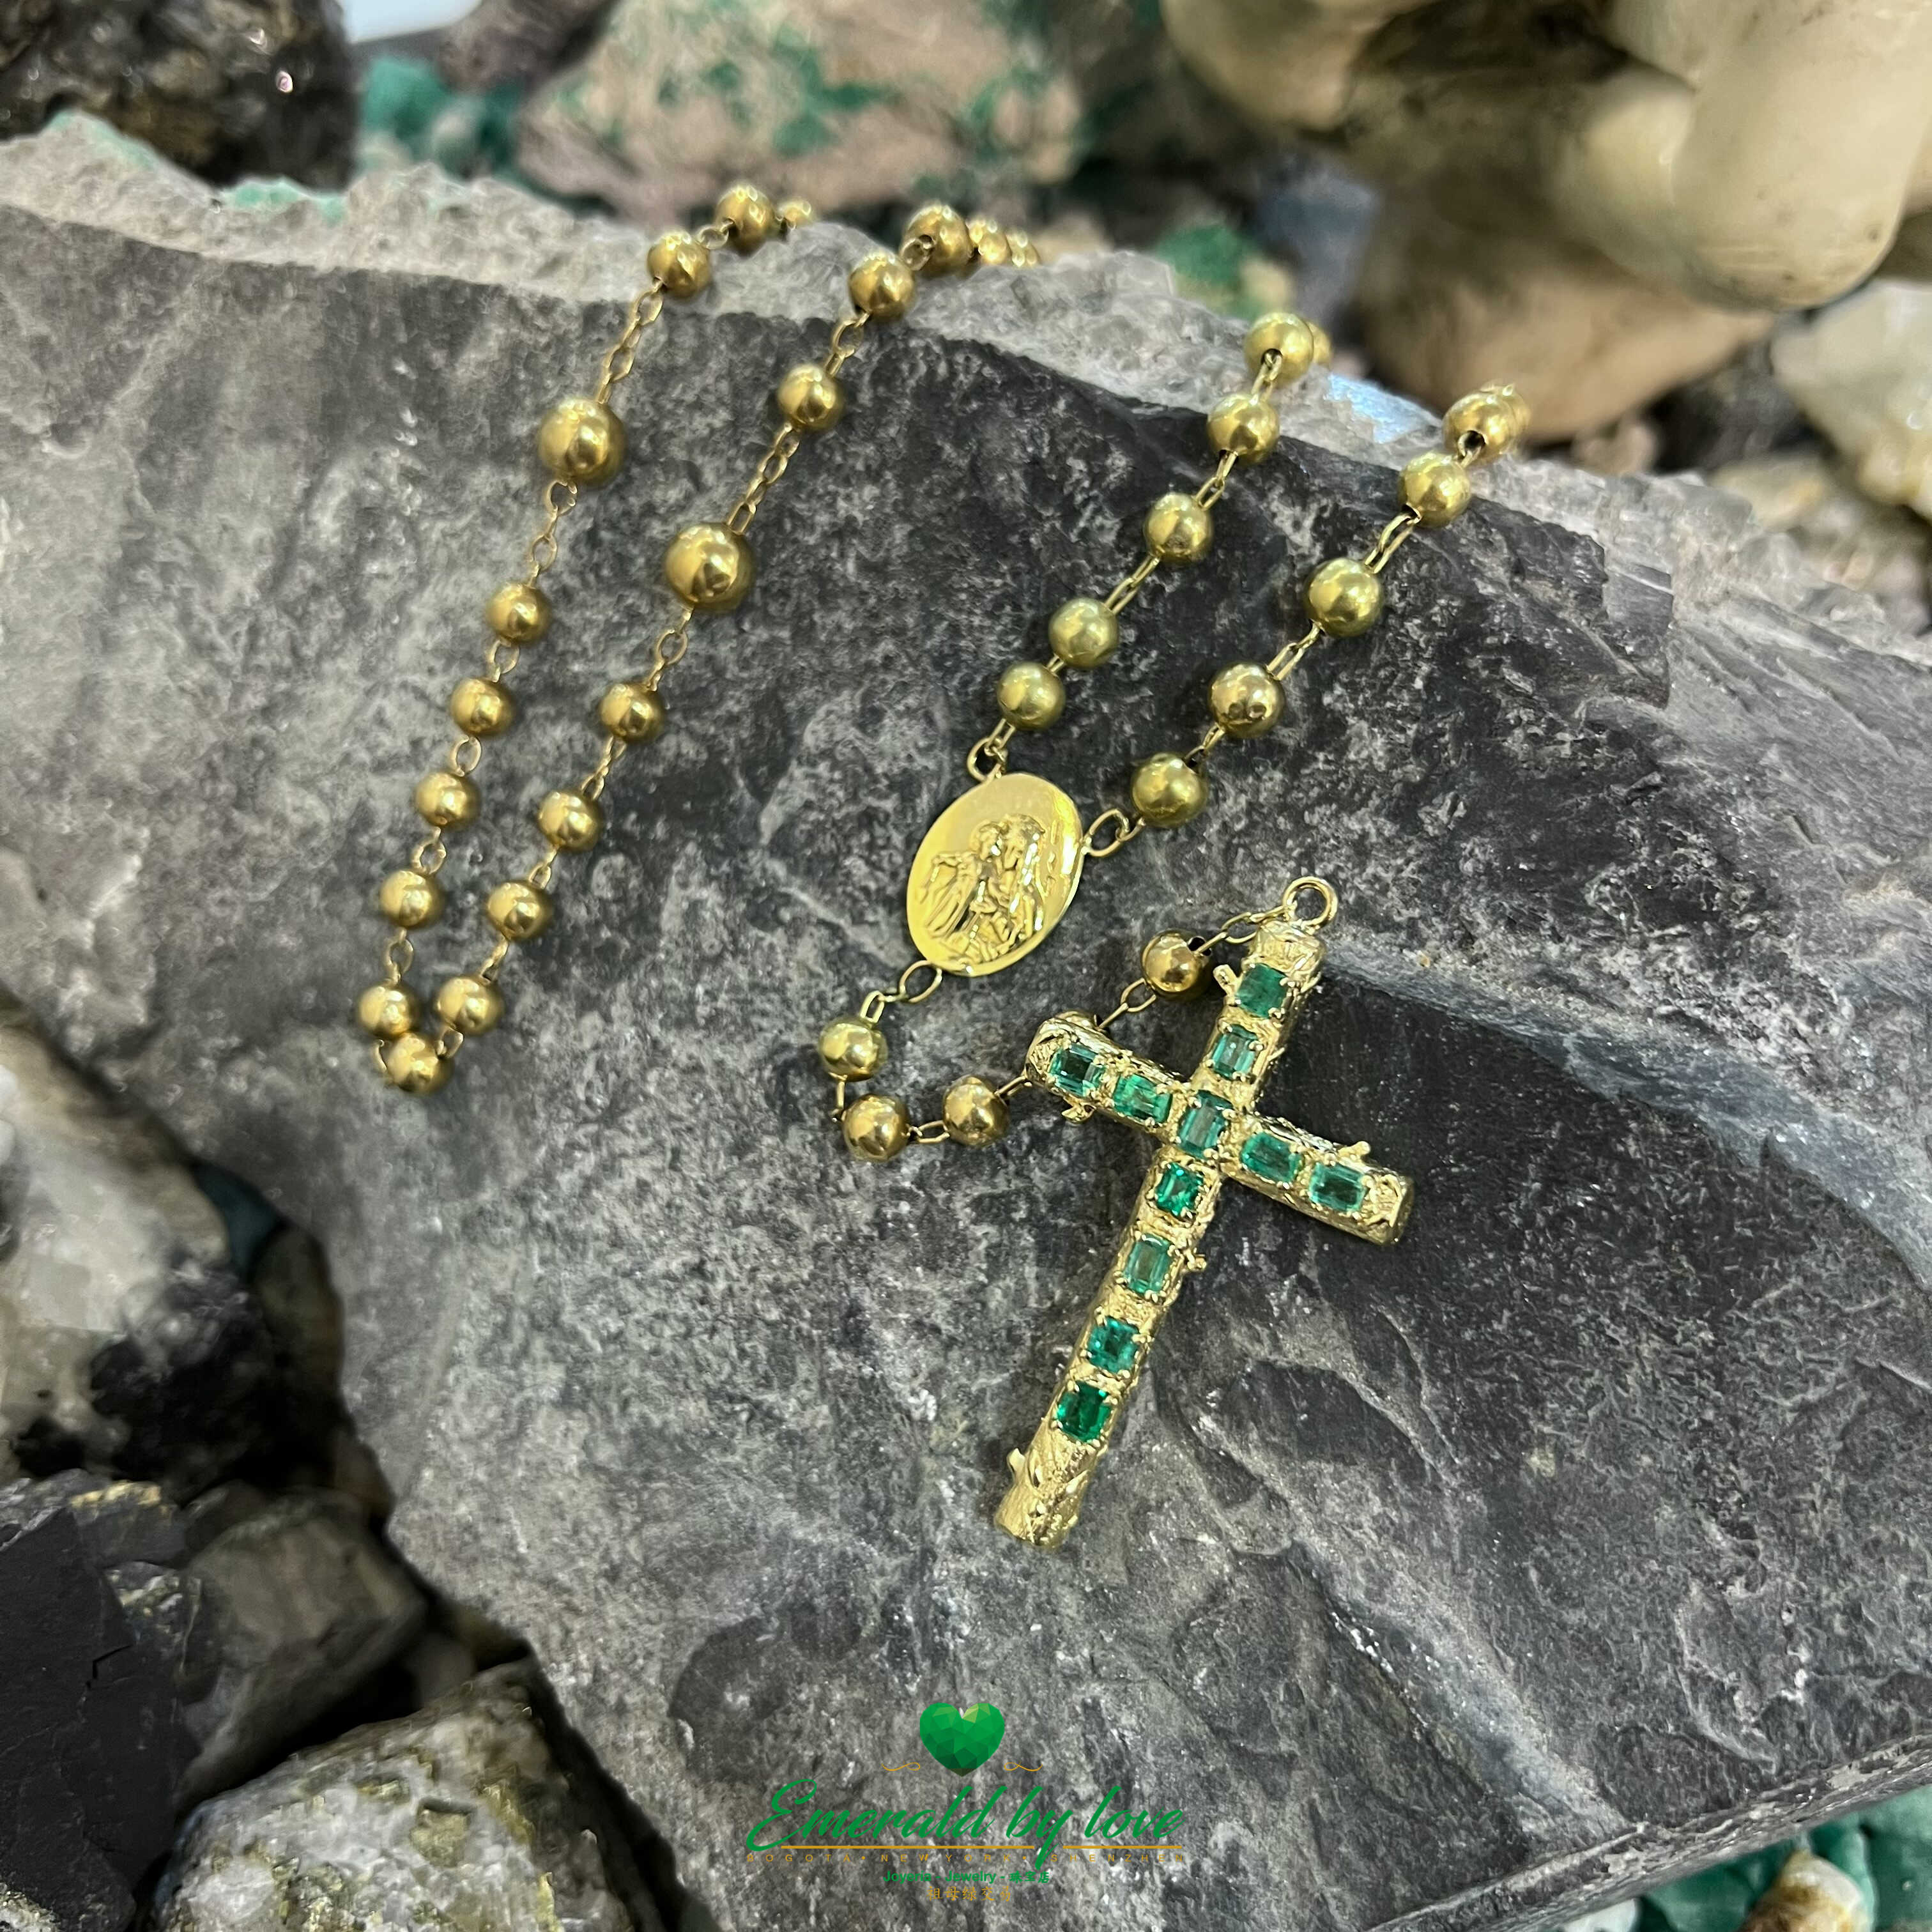 Opulent 18K Yellow Gold Rosary with Emeralds - A Timeless Expression of Devotion